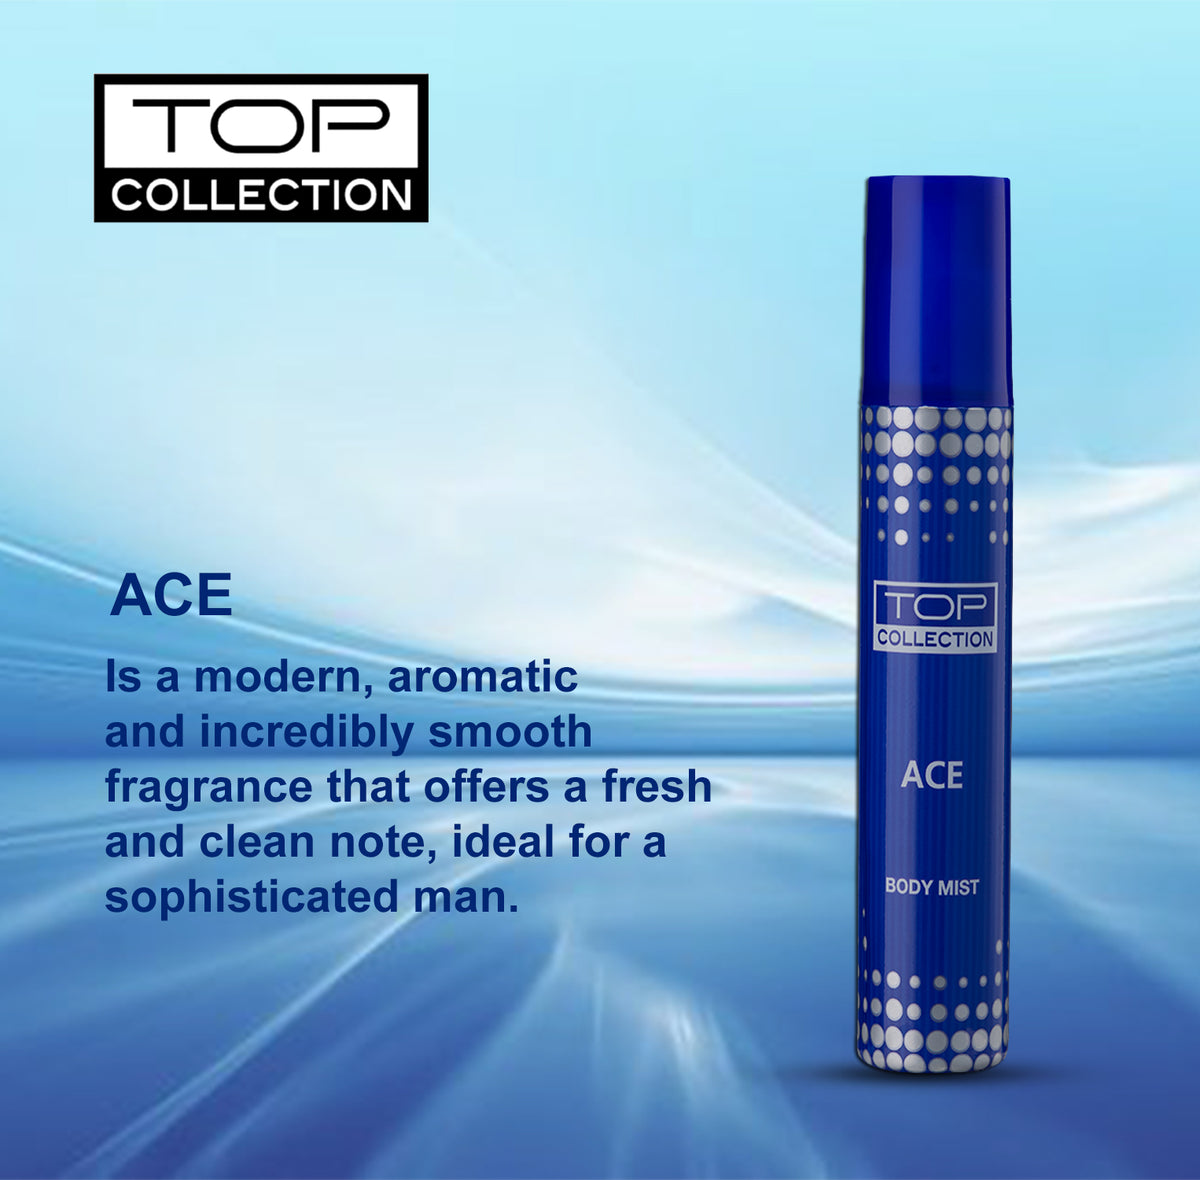 Top Collection Body Mist - Ace, 75ml